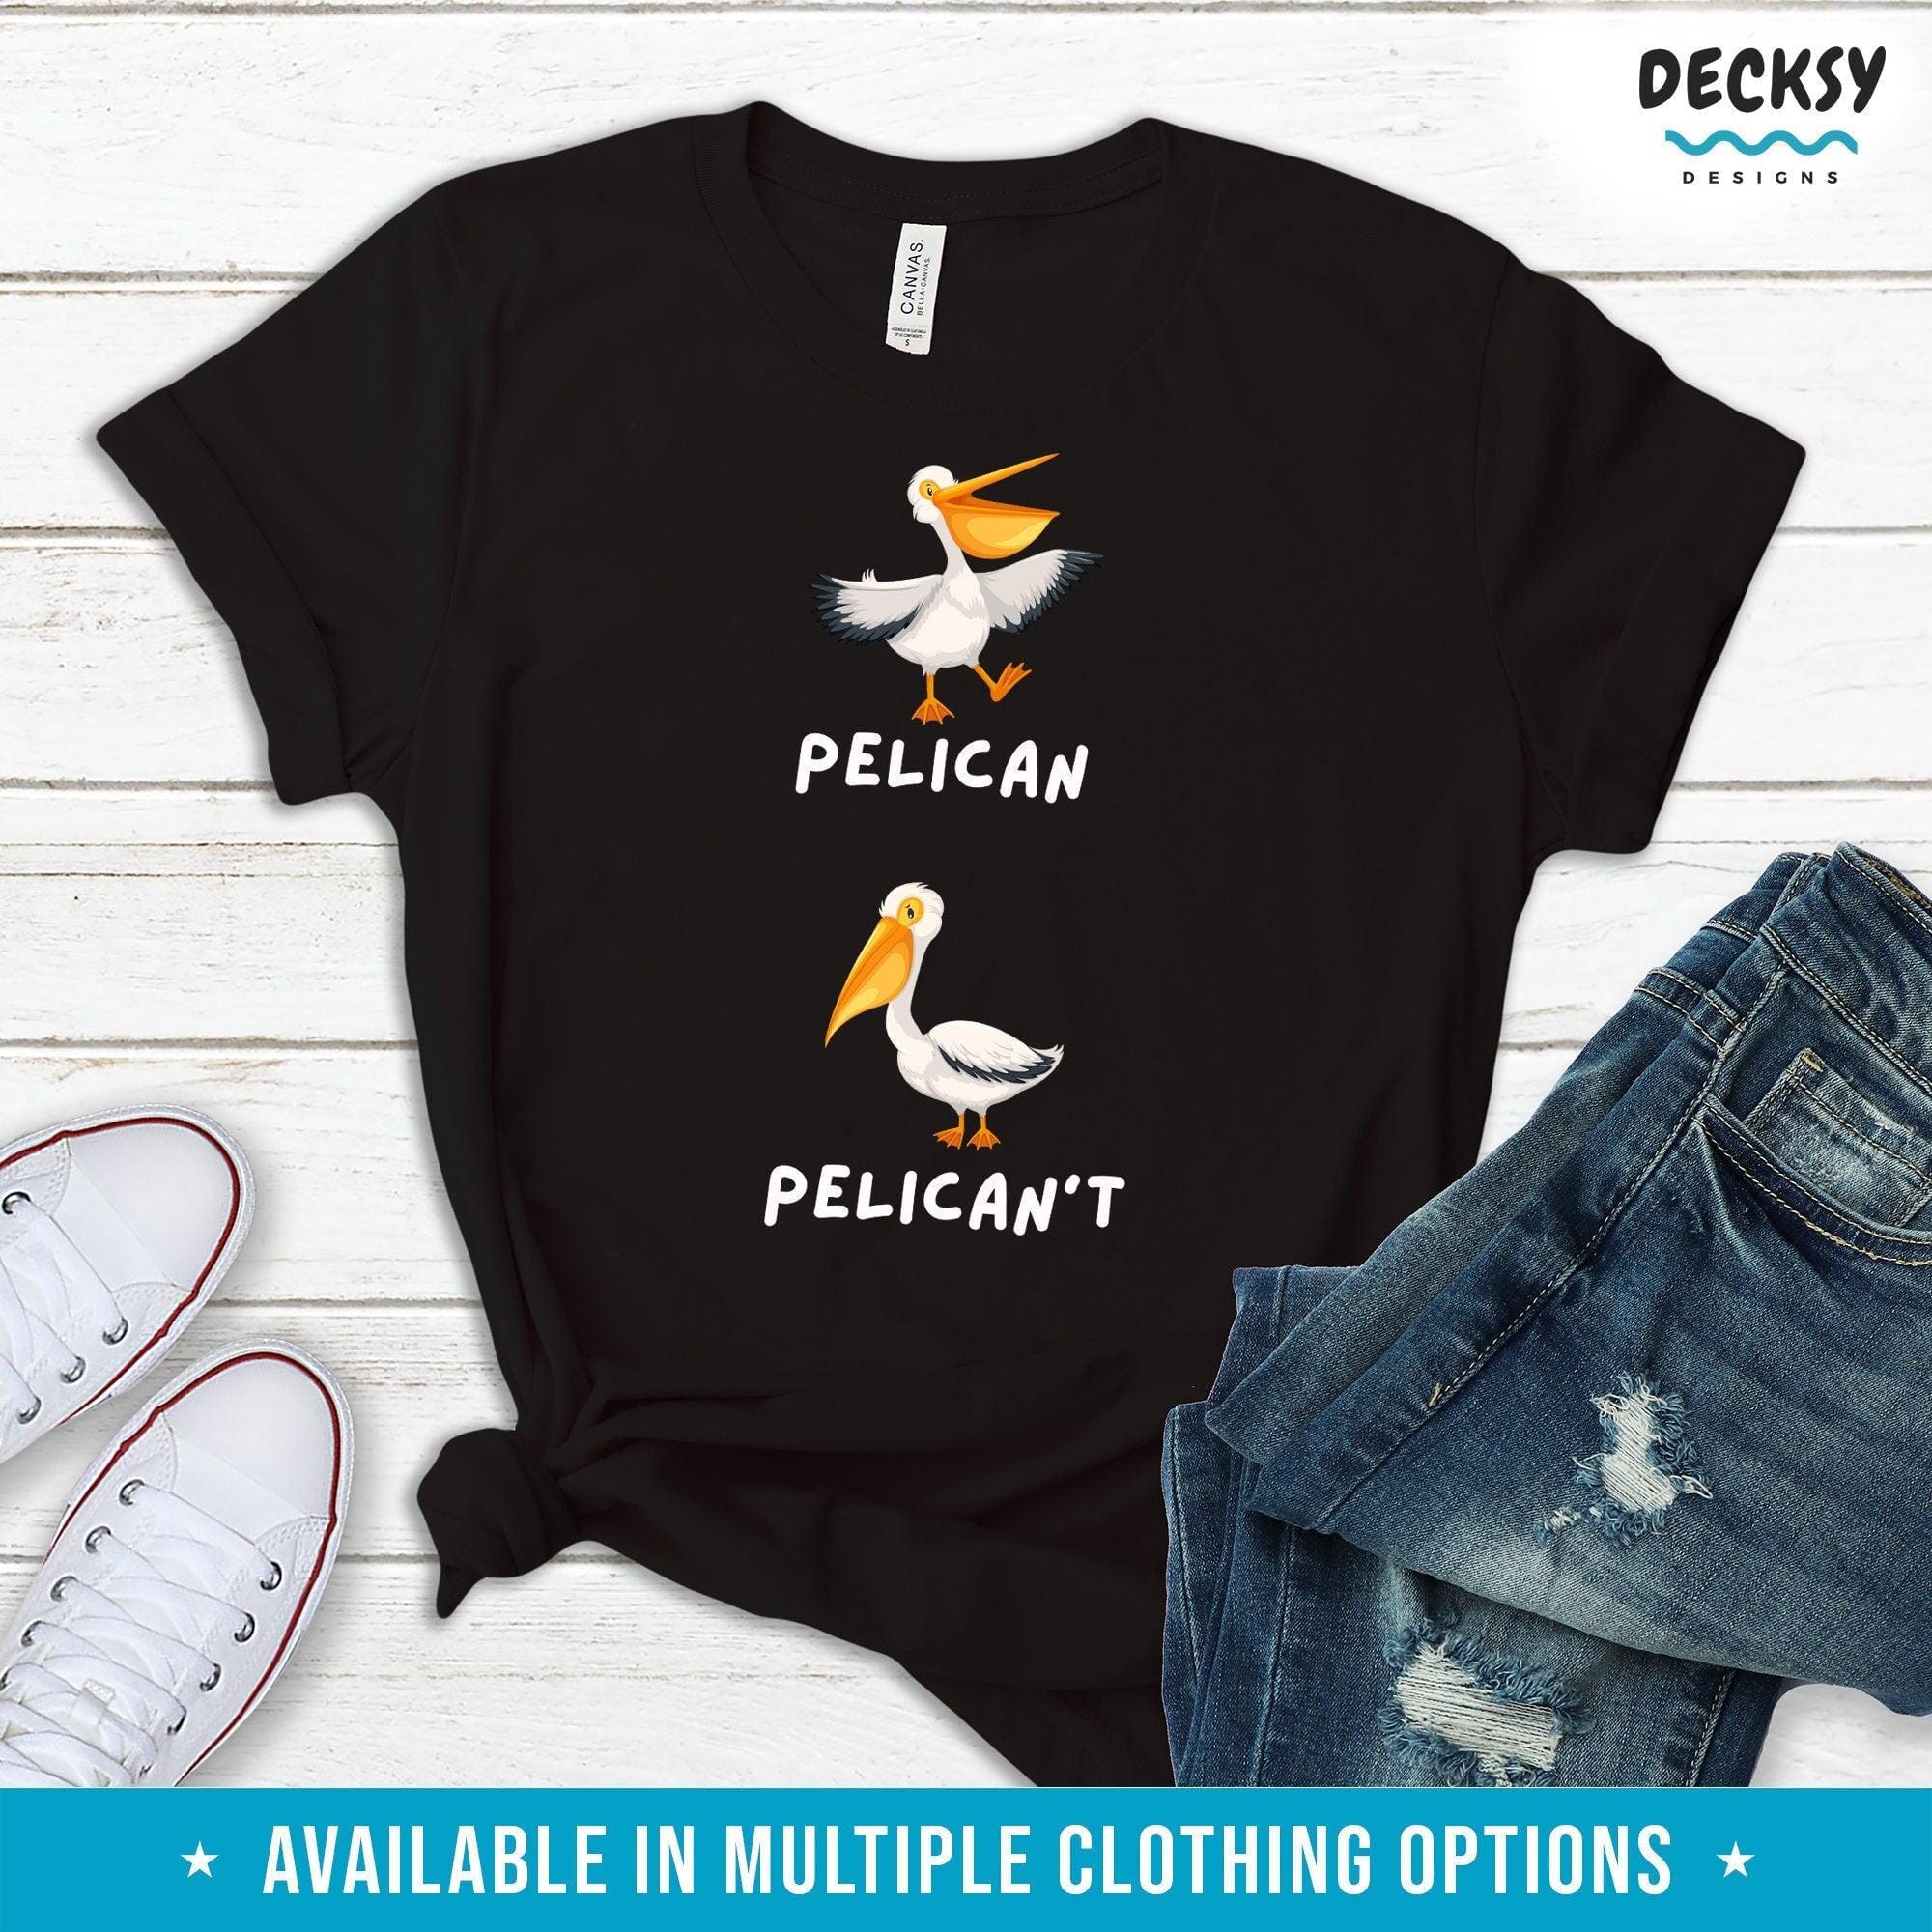 Pelican Tshirt, Funny Gift For Bird Lover-Clothing:Gender-Neutral Adult Clothing:Tops & Tees:T-shirts:Graphic Tees-DecksyDesigns